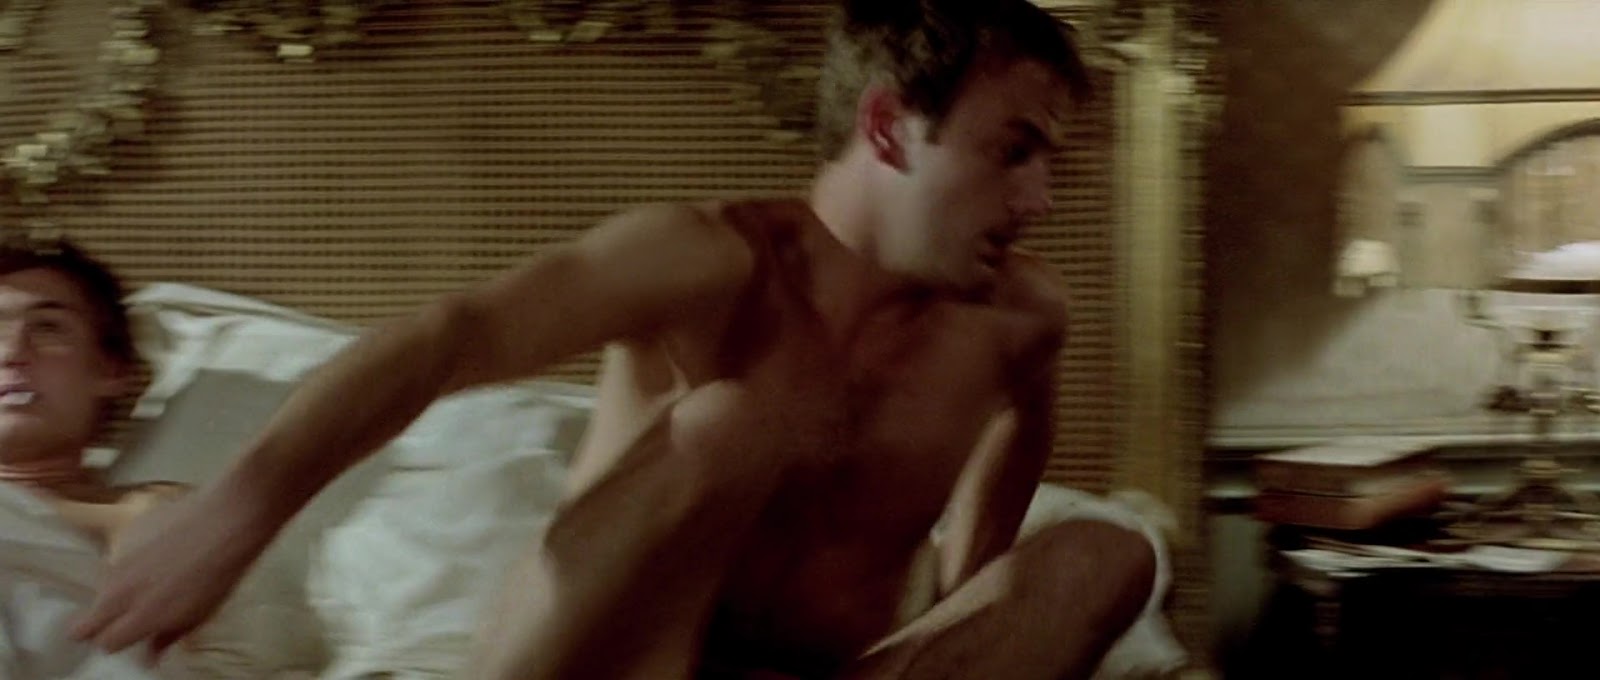 Benedict Sandiford and Jude Law nude in Wilde.